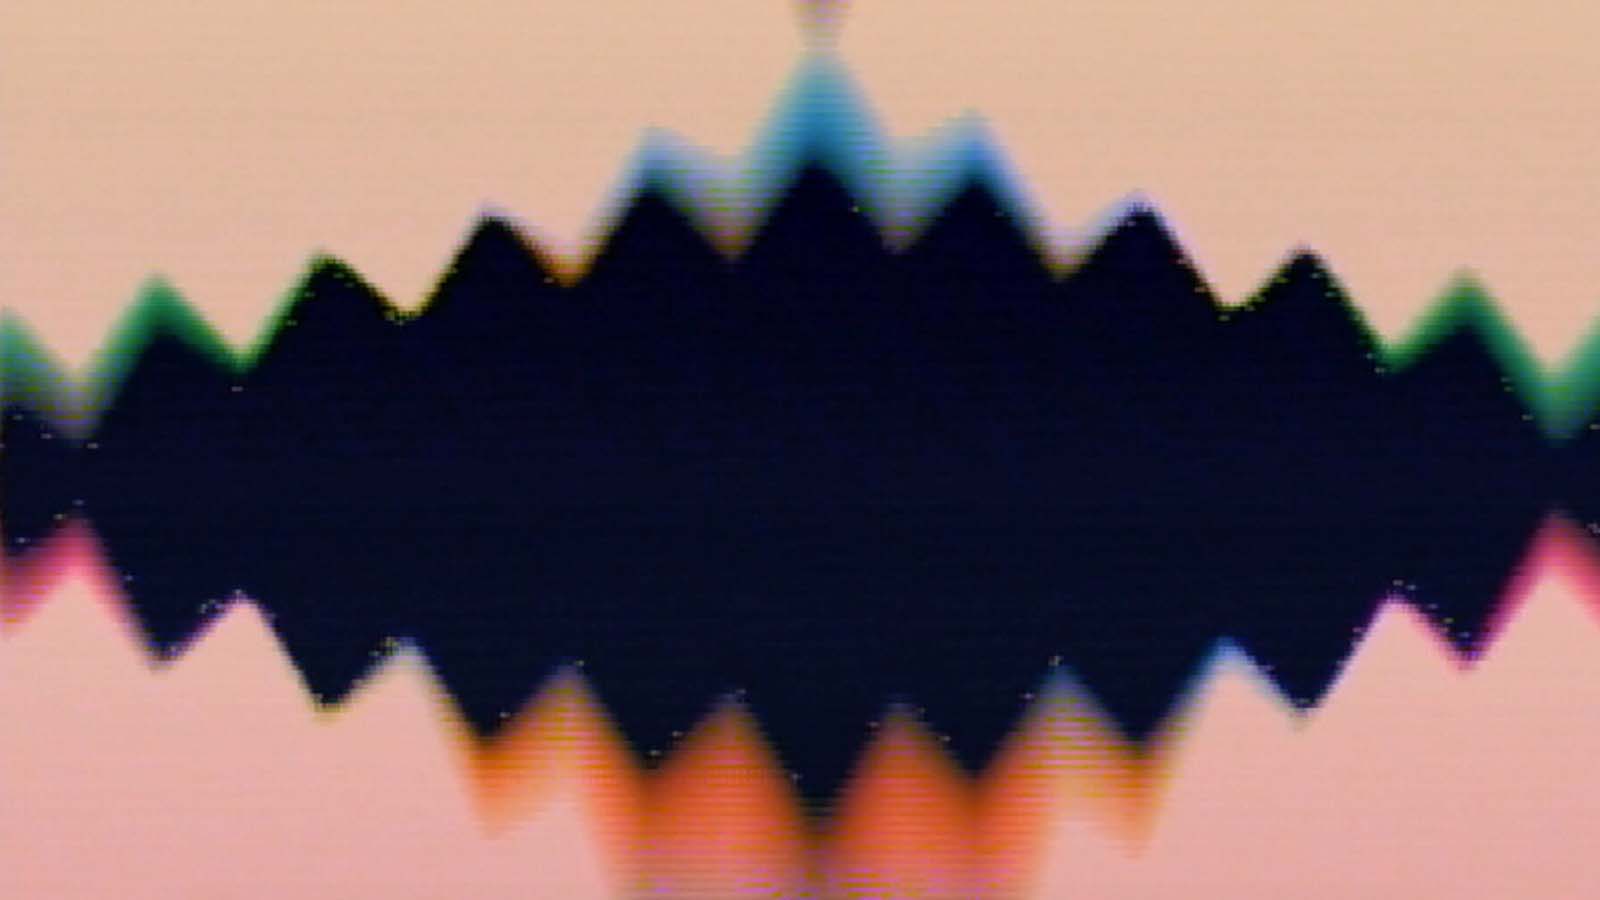 An abstract image pf a black spiky shape surrounded by soft pink, blue and orange light